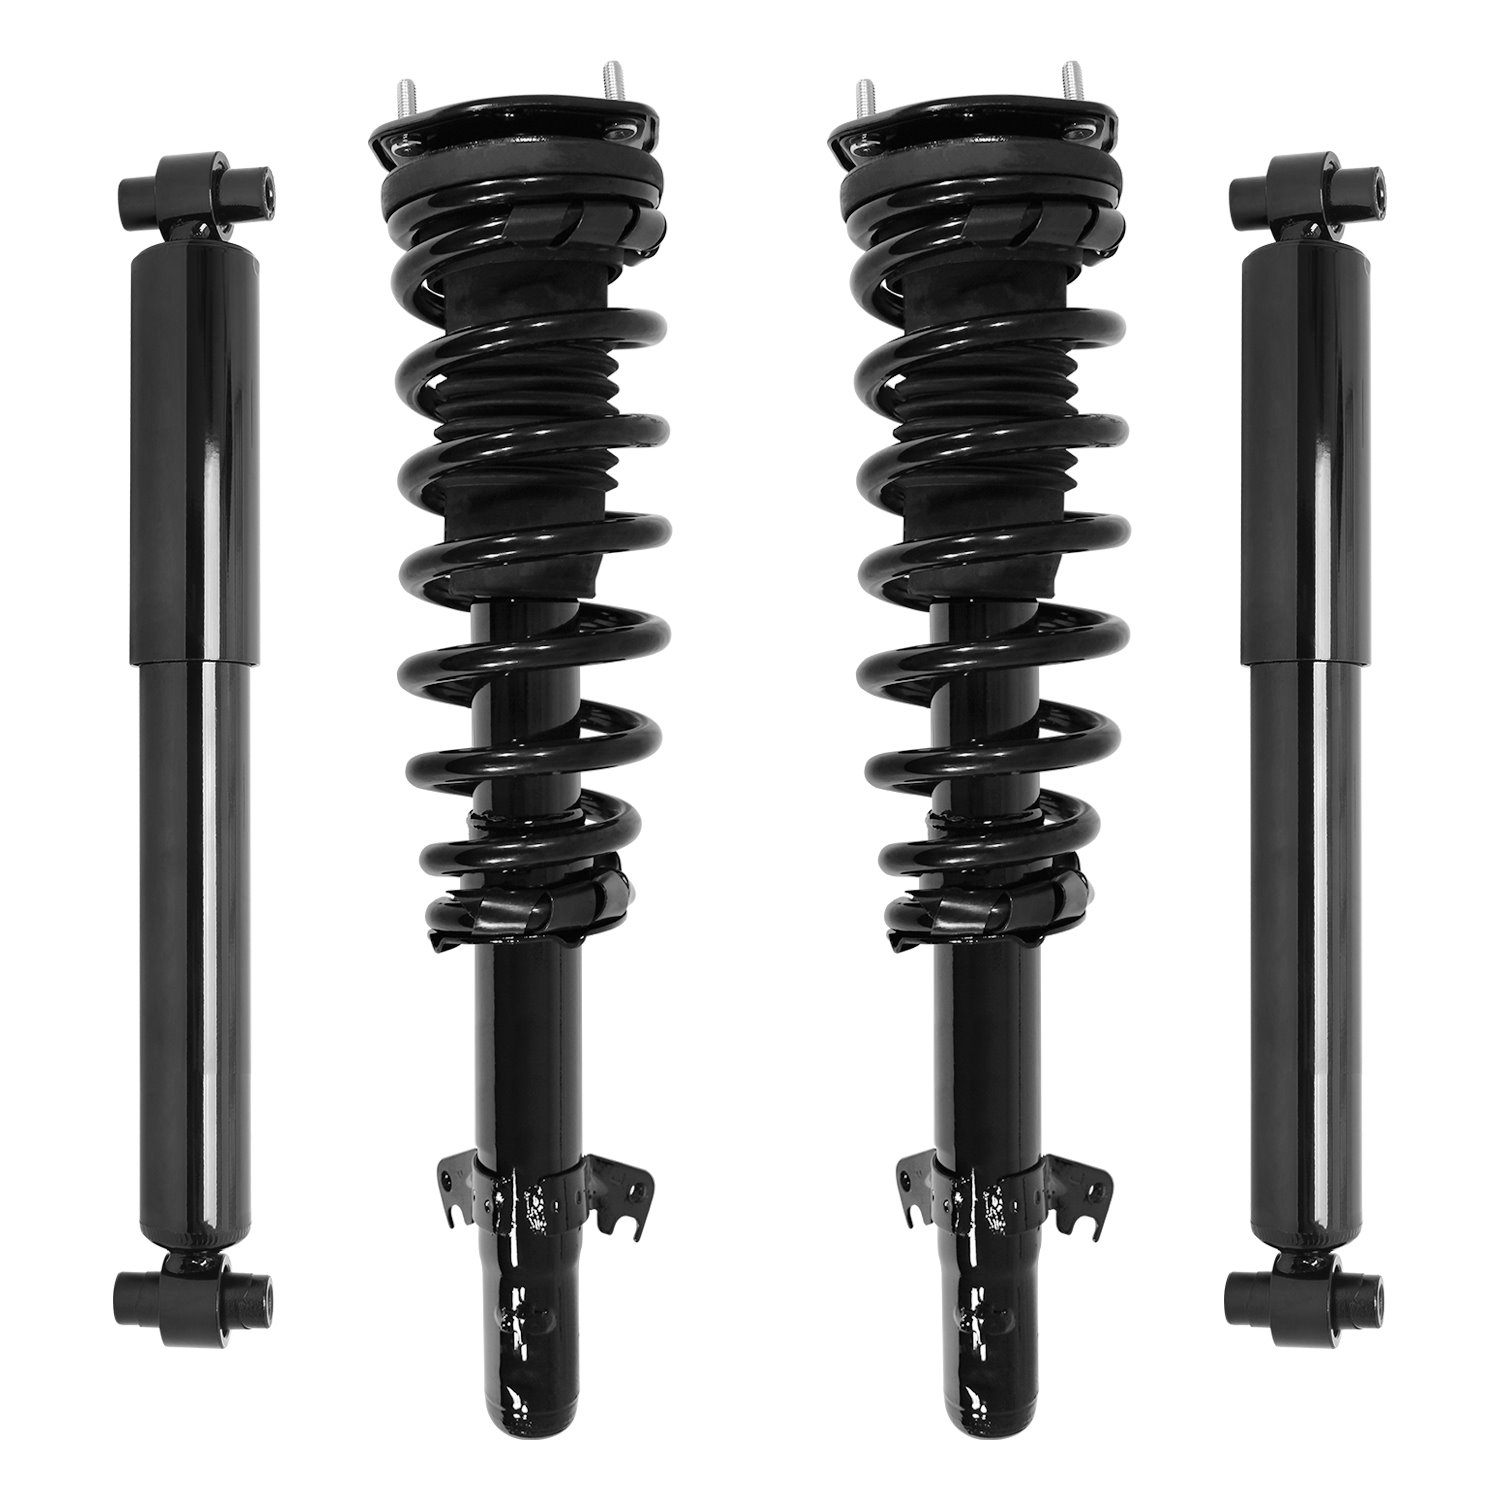 4-11980-252080-001 Front & Rear Suspension Strut & Coil Spring Assembly Fits Select Ford Fusion, Mercury Milan